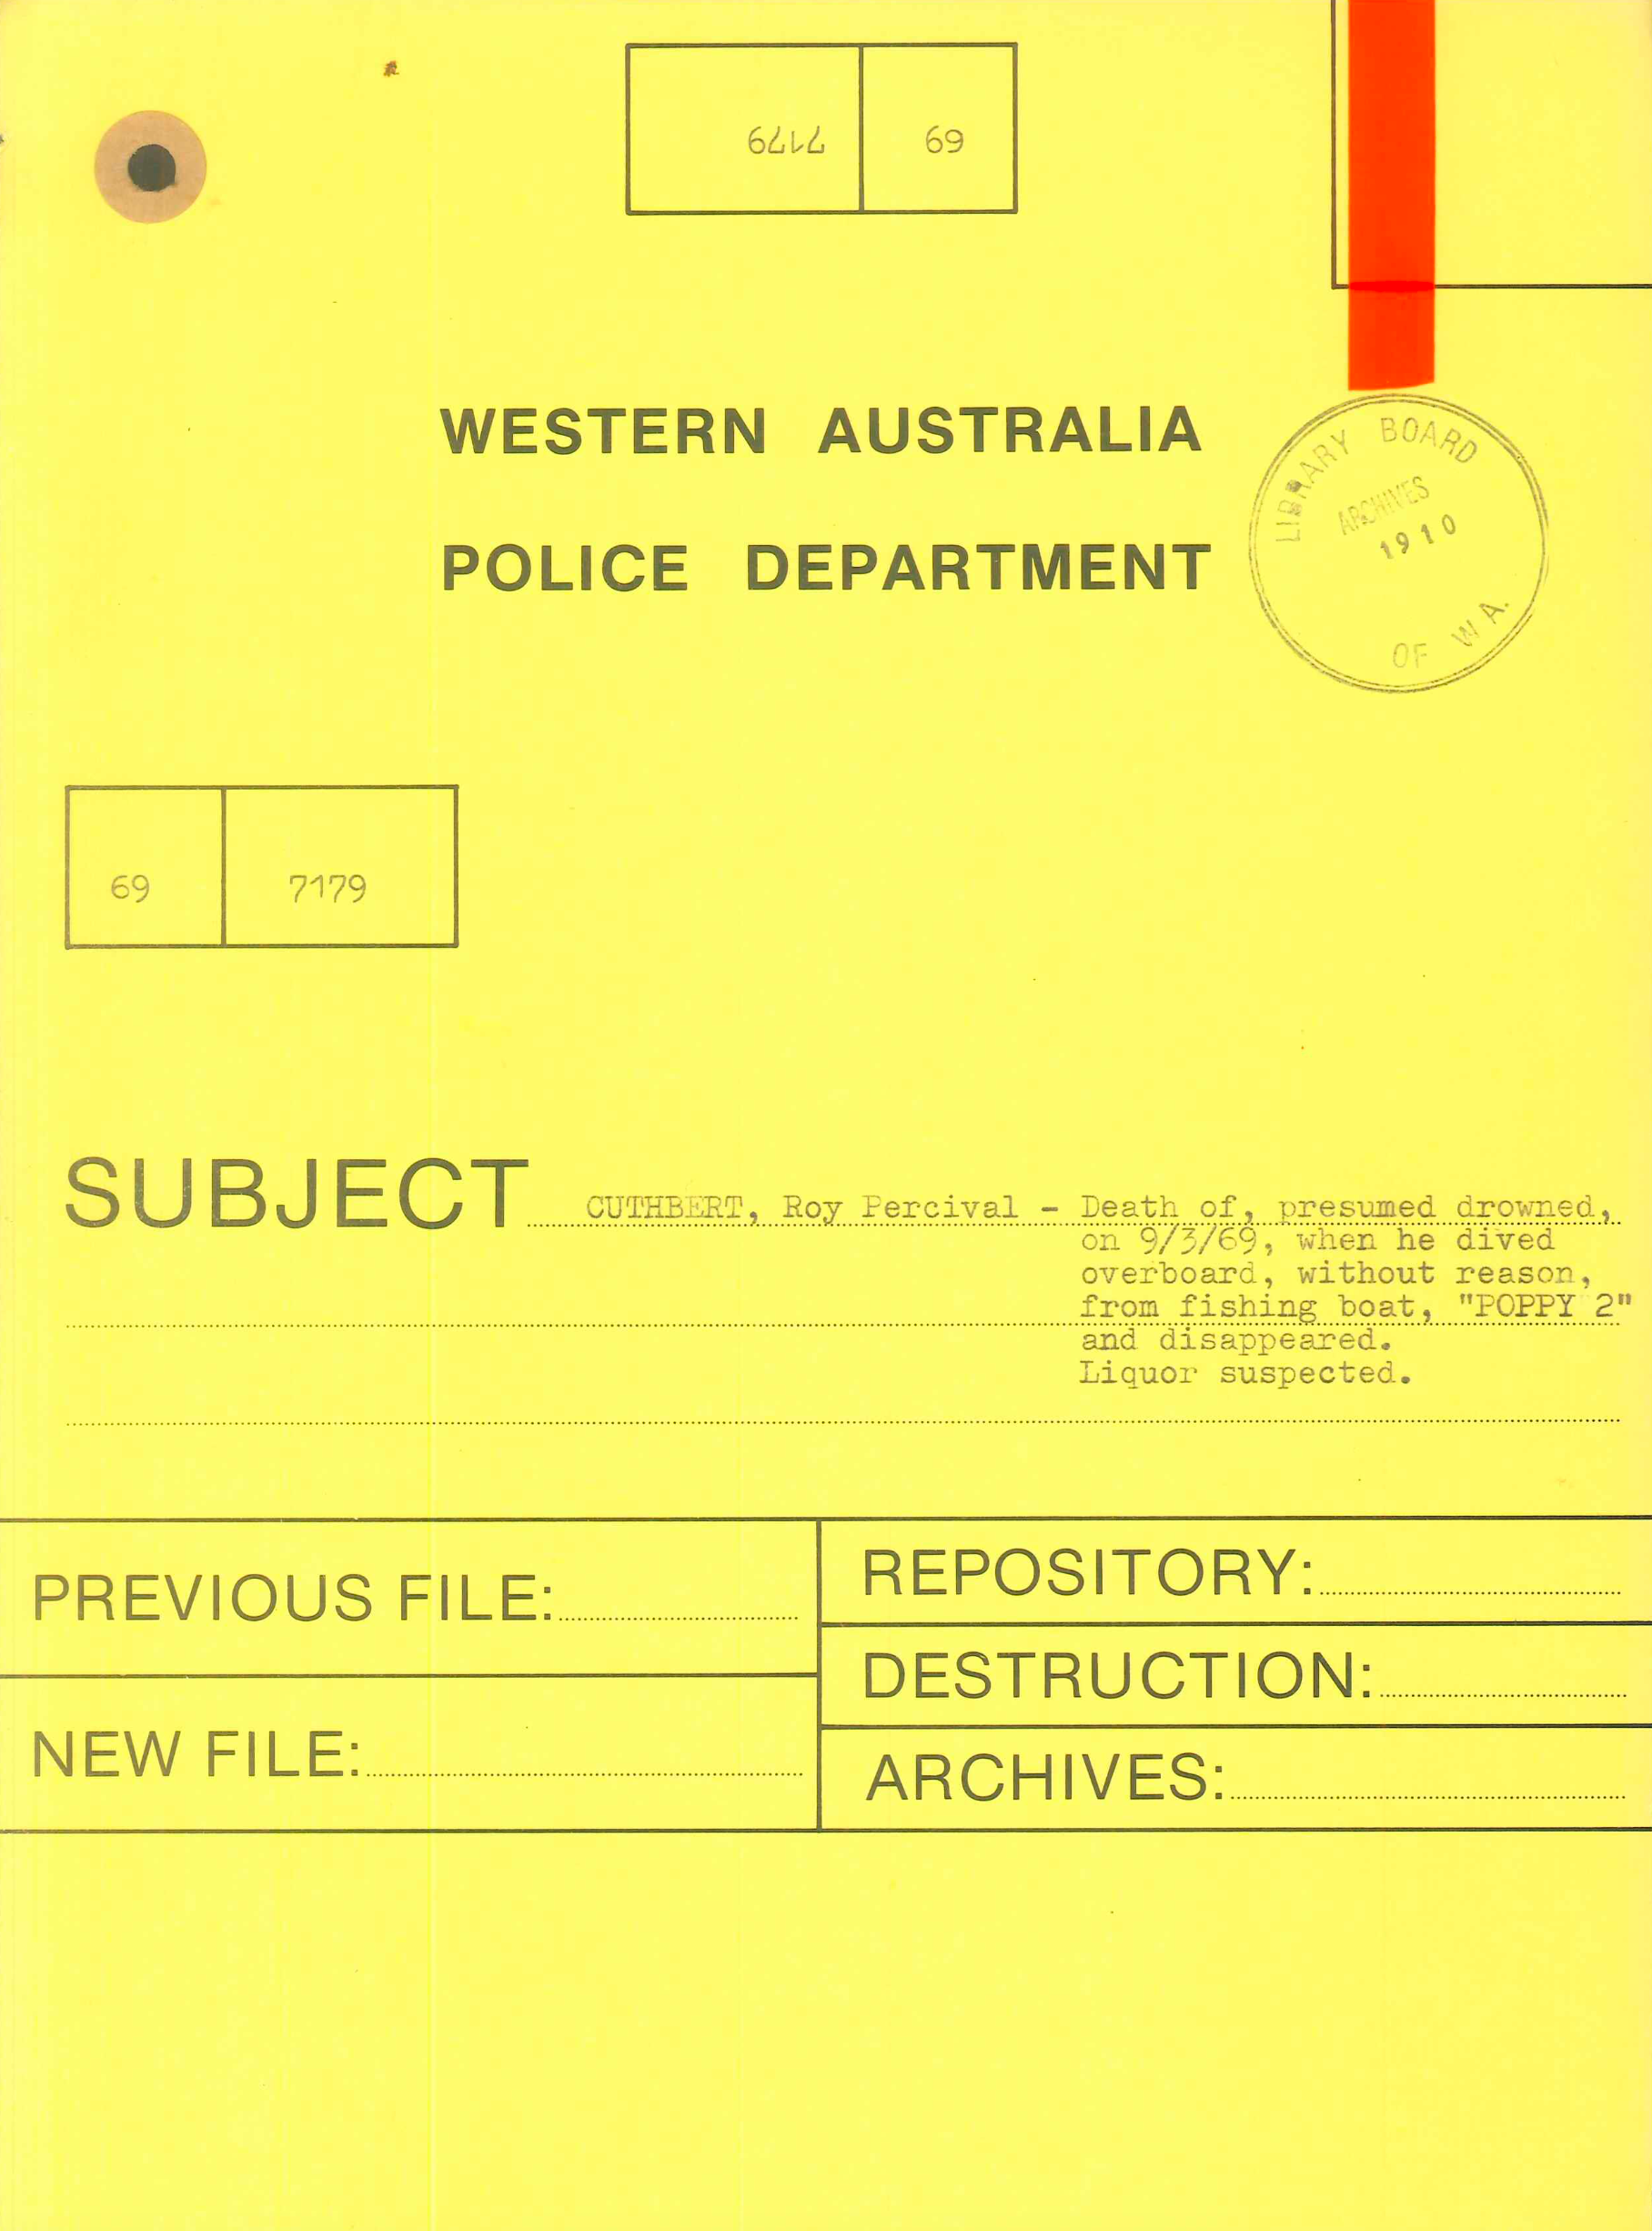 Roy Percival Cuthbert Police Report